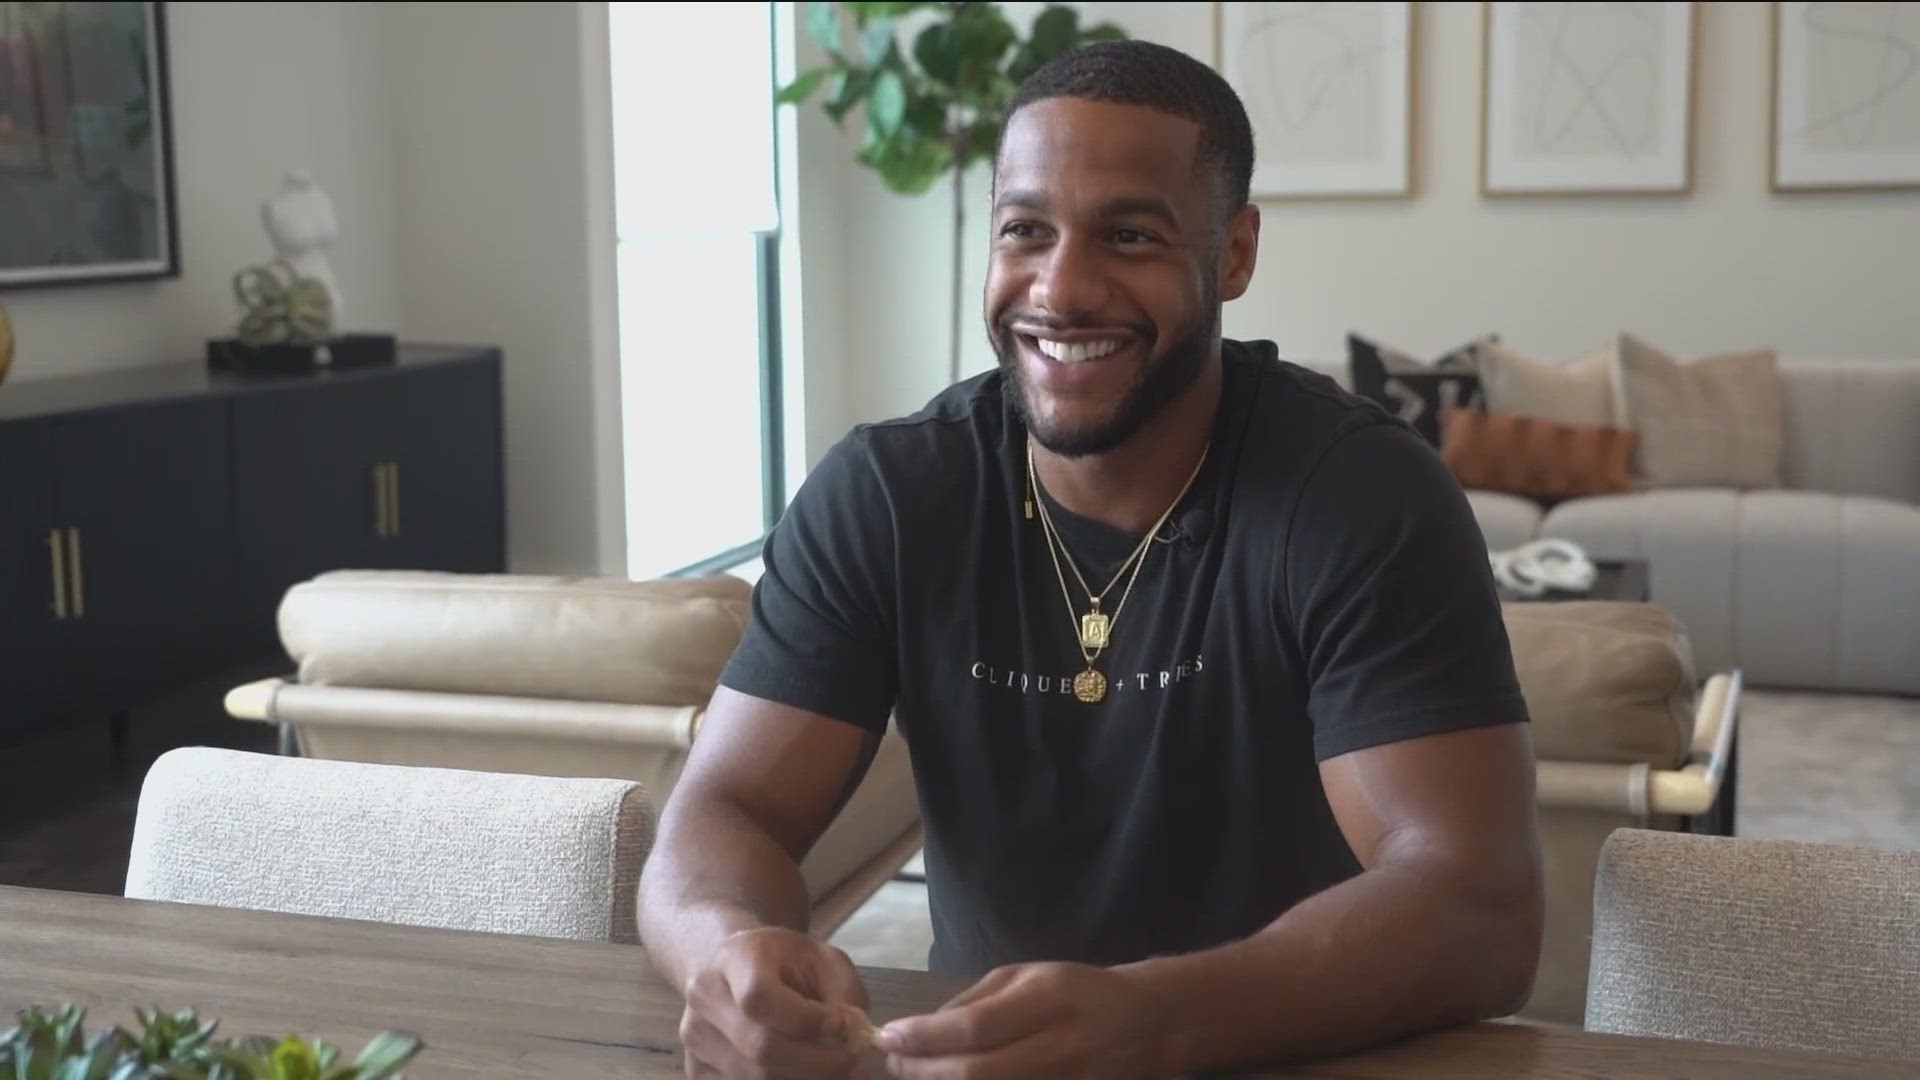 The 26-year-old Texas State graduate has immersed himself in social media, real estate, reality TV, modeling and acting, coaching and pro rugby.